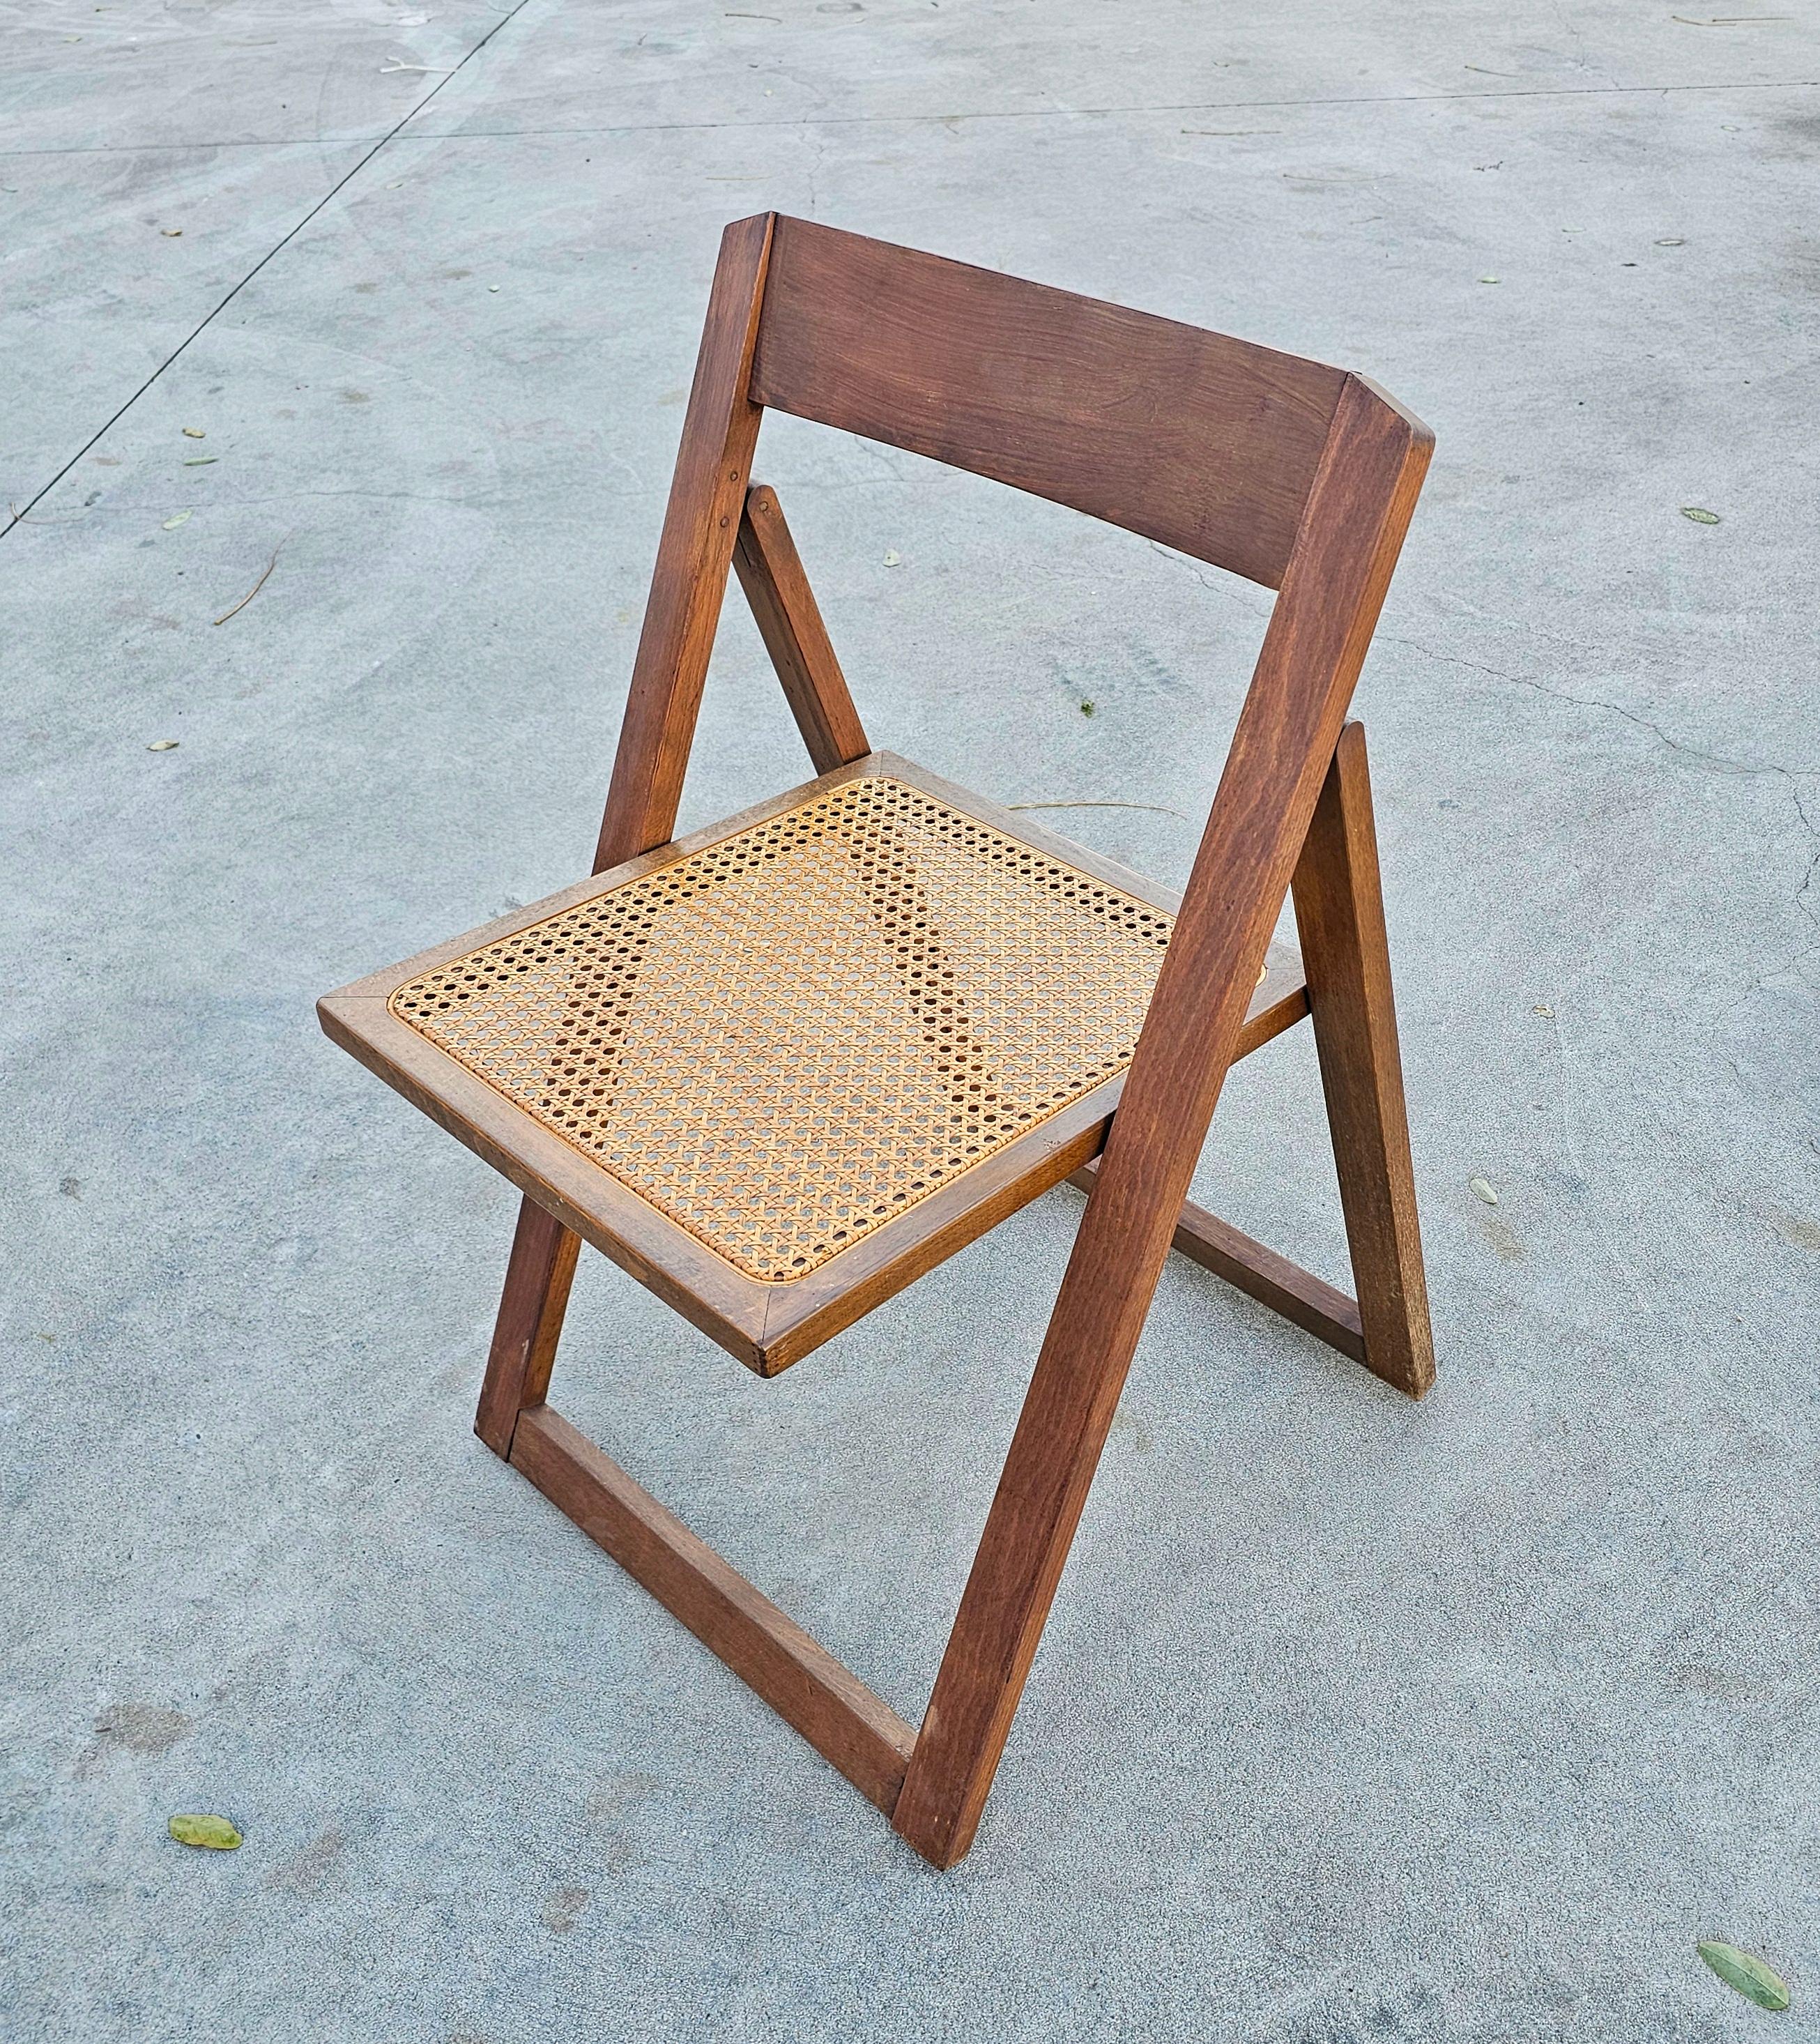 Set of 6 Folding Chairs with Cane Seats in style of Aldo Jacober, Italy 1980s For Sale 5